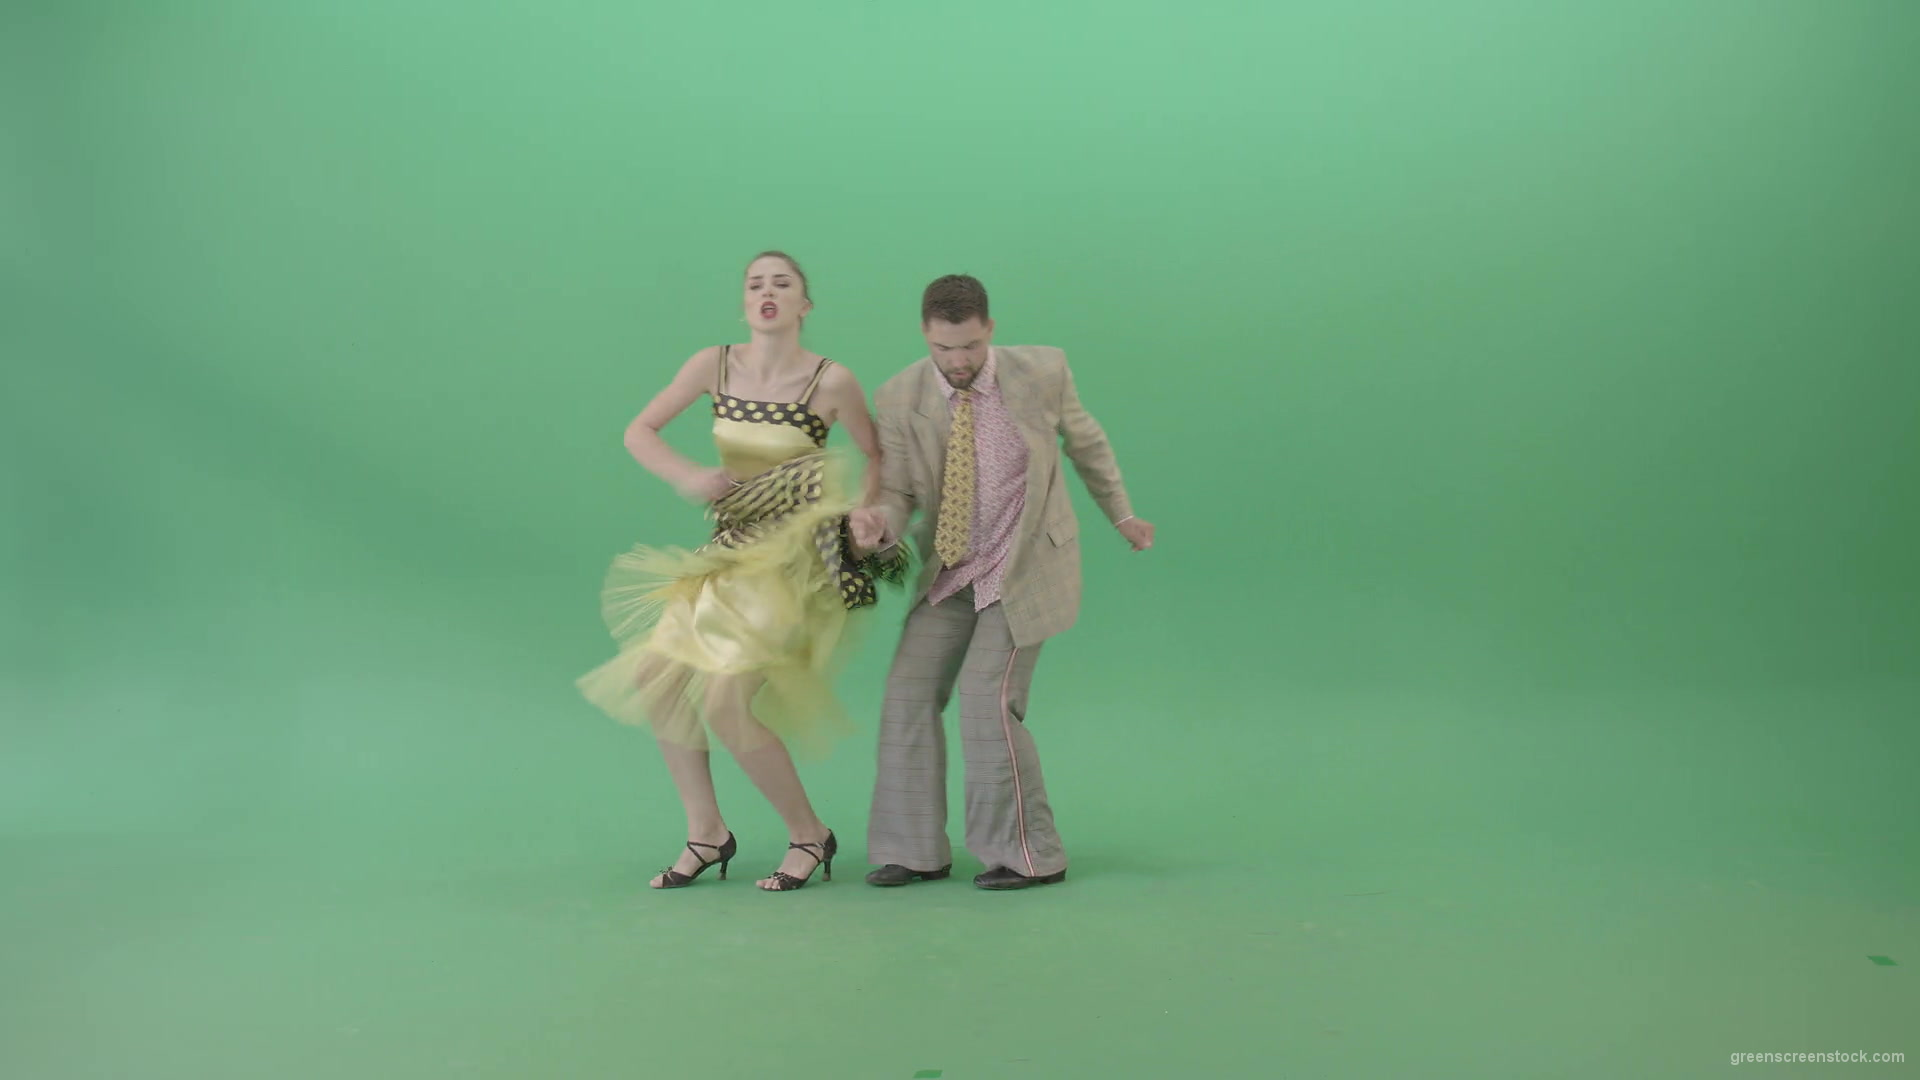 Happy-Man-and-woman-dancing-Boogie-woogie-moves-and-rock-and-roll-over-Green-Screen-4K-Video-Footage-1920_002 Green Screen Stock